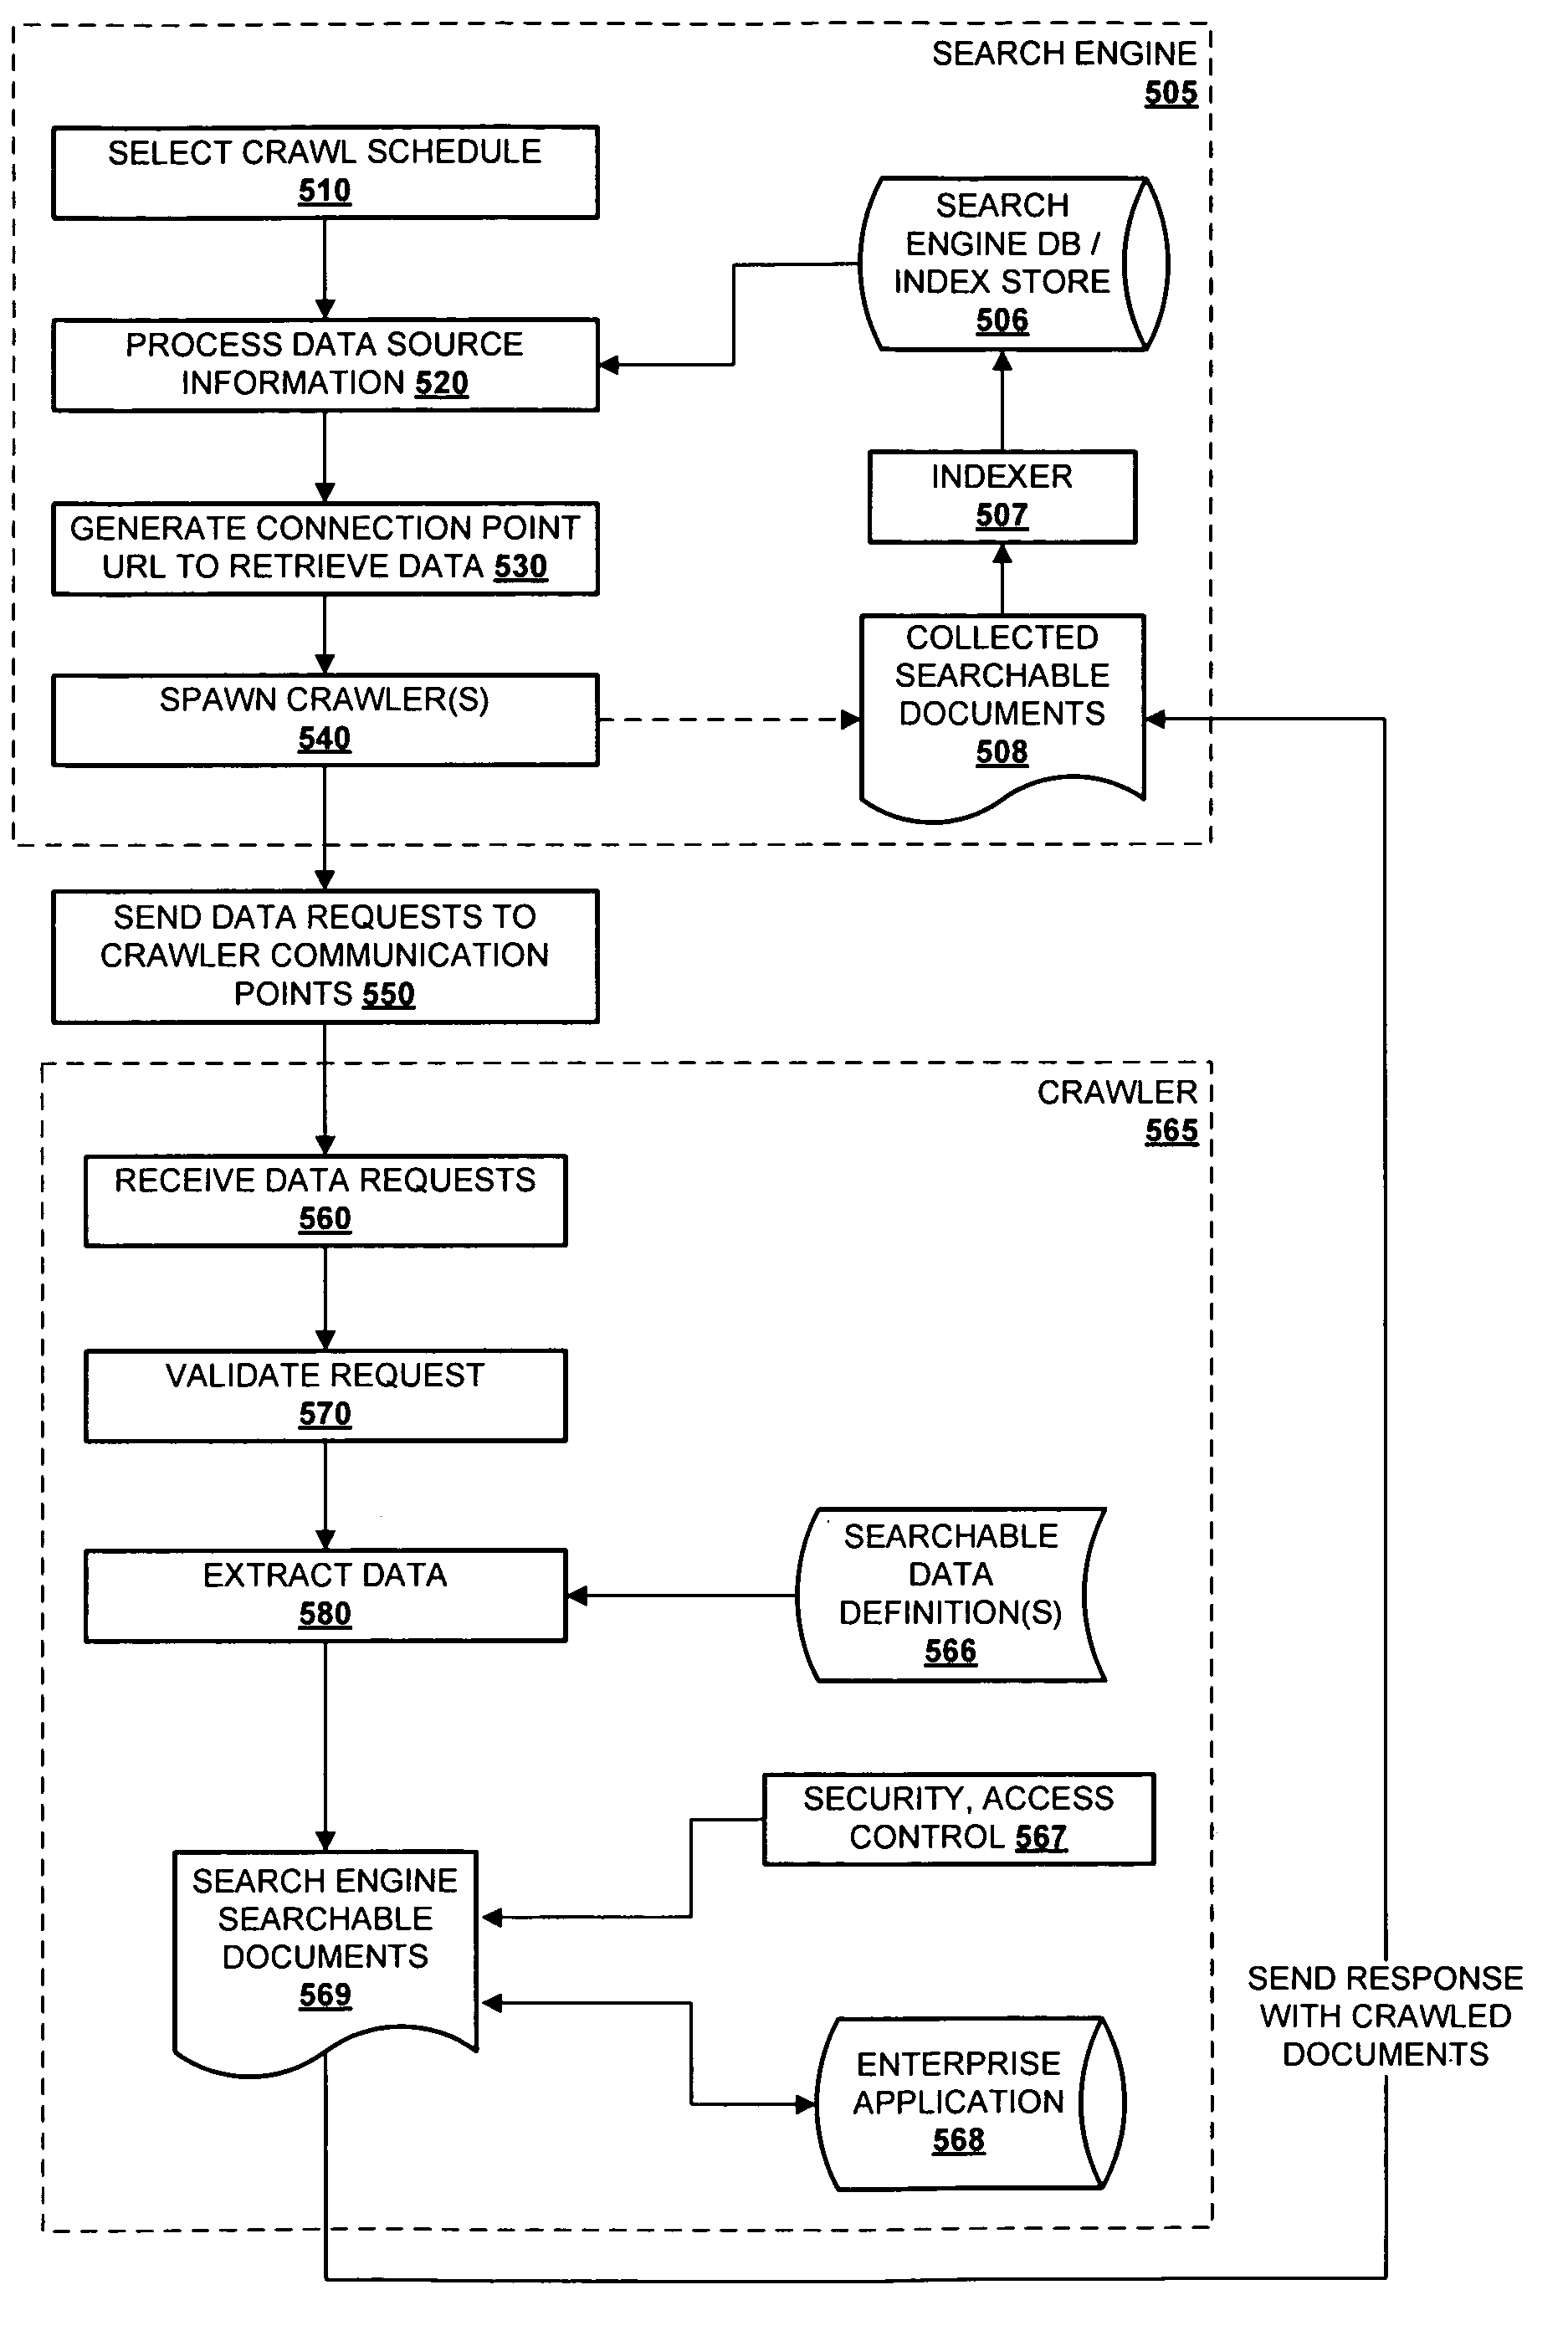 System and method for searching enterprise application data